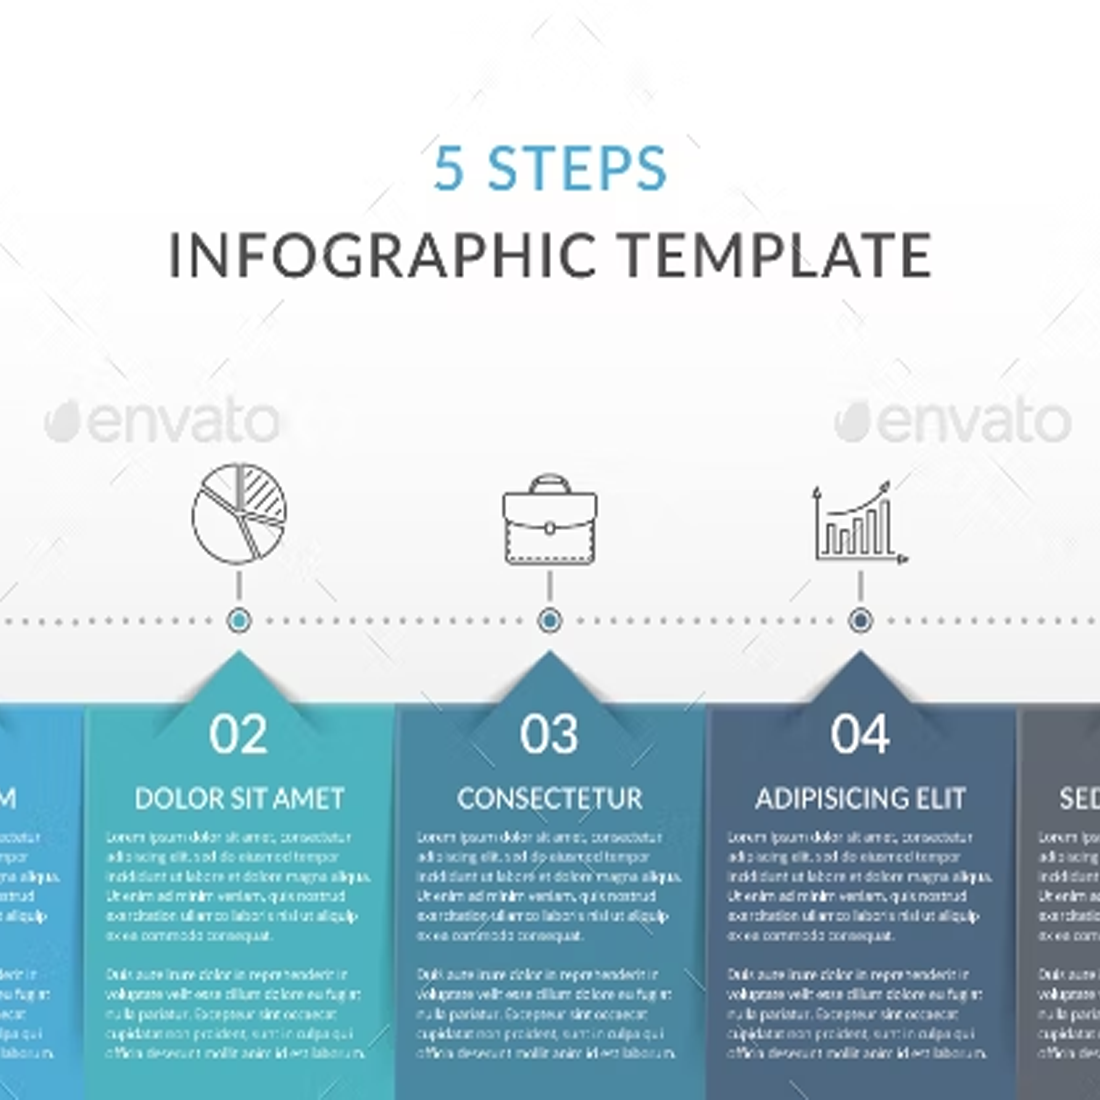 Images preview 5 steps infographic template.